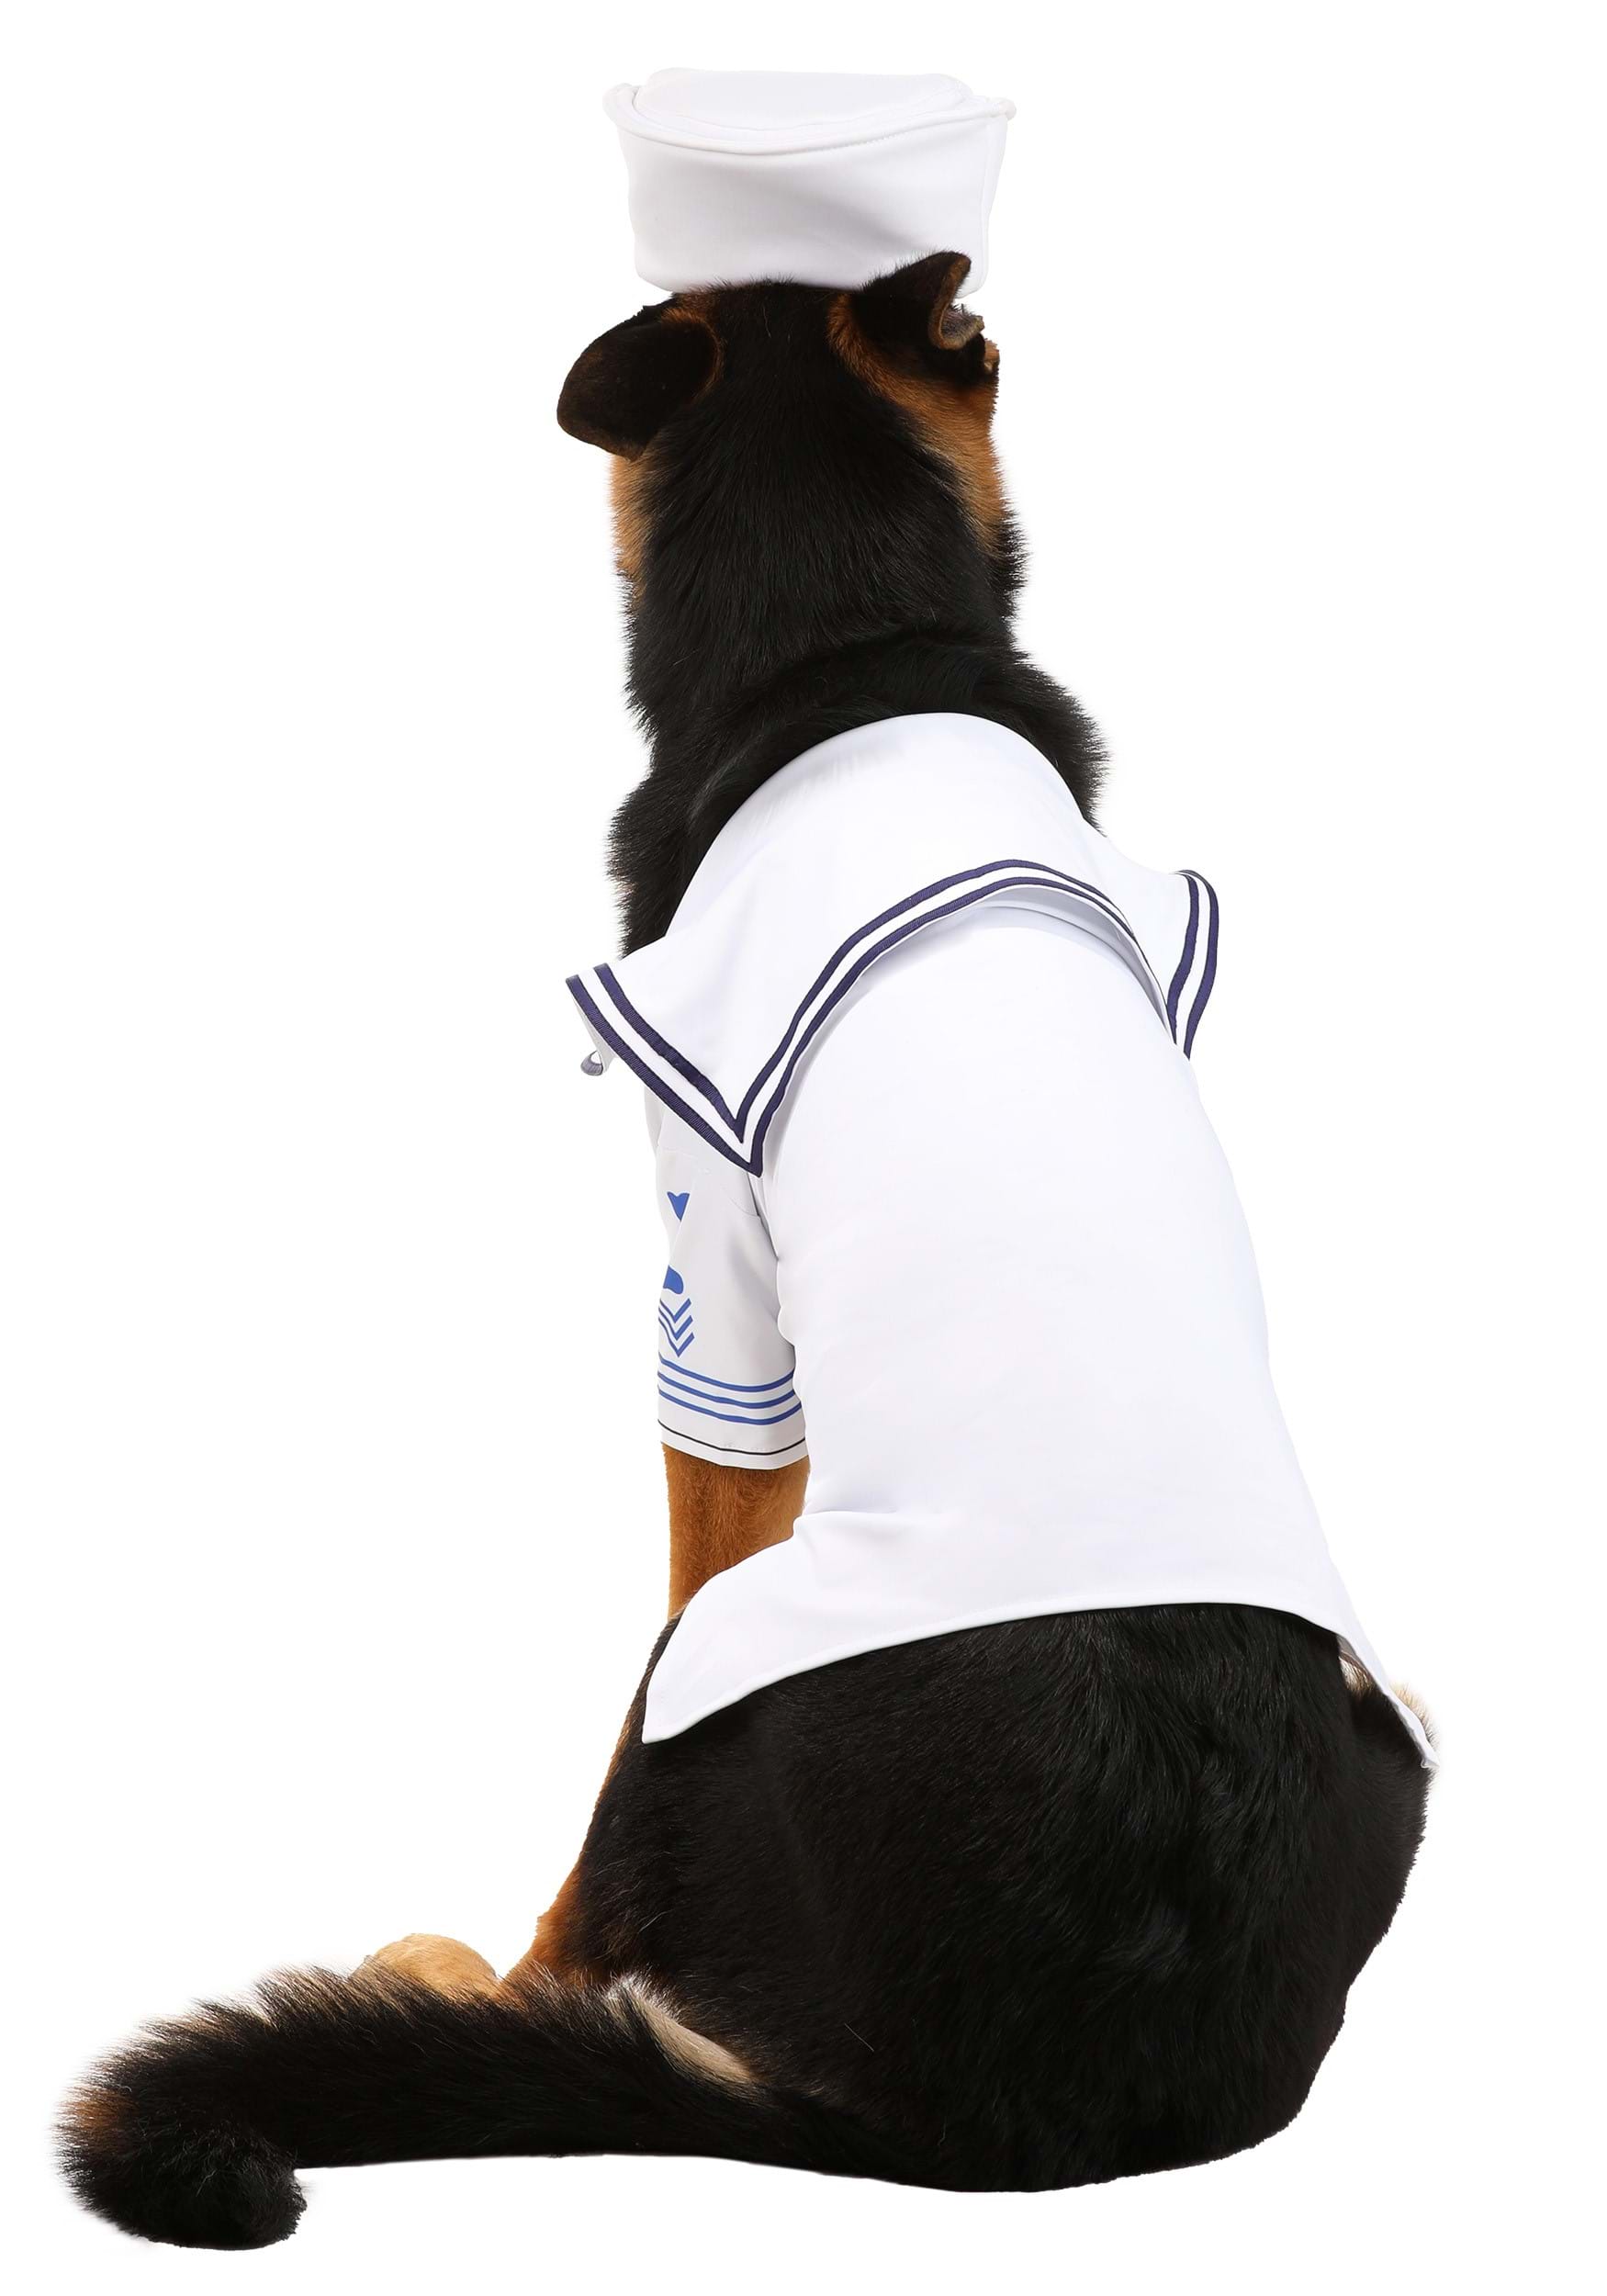 Sailor Costume For Dogs